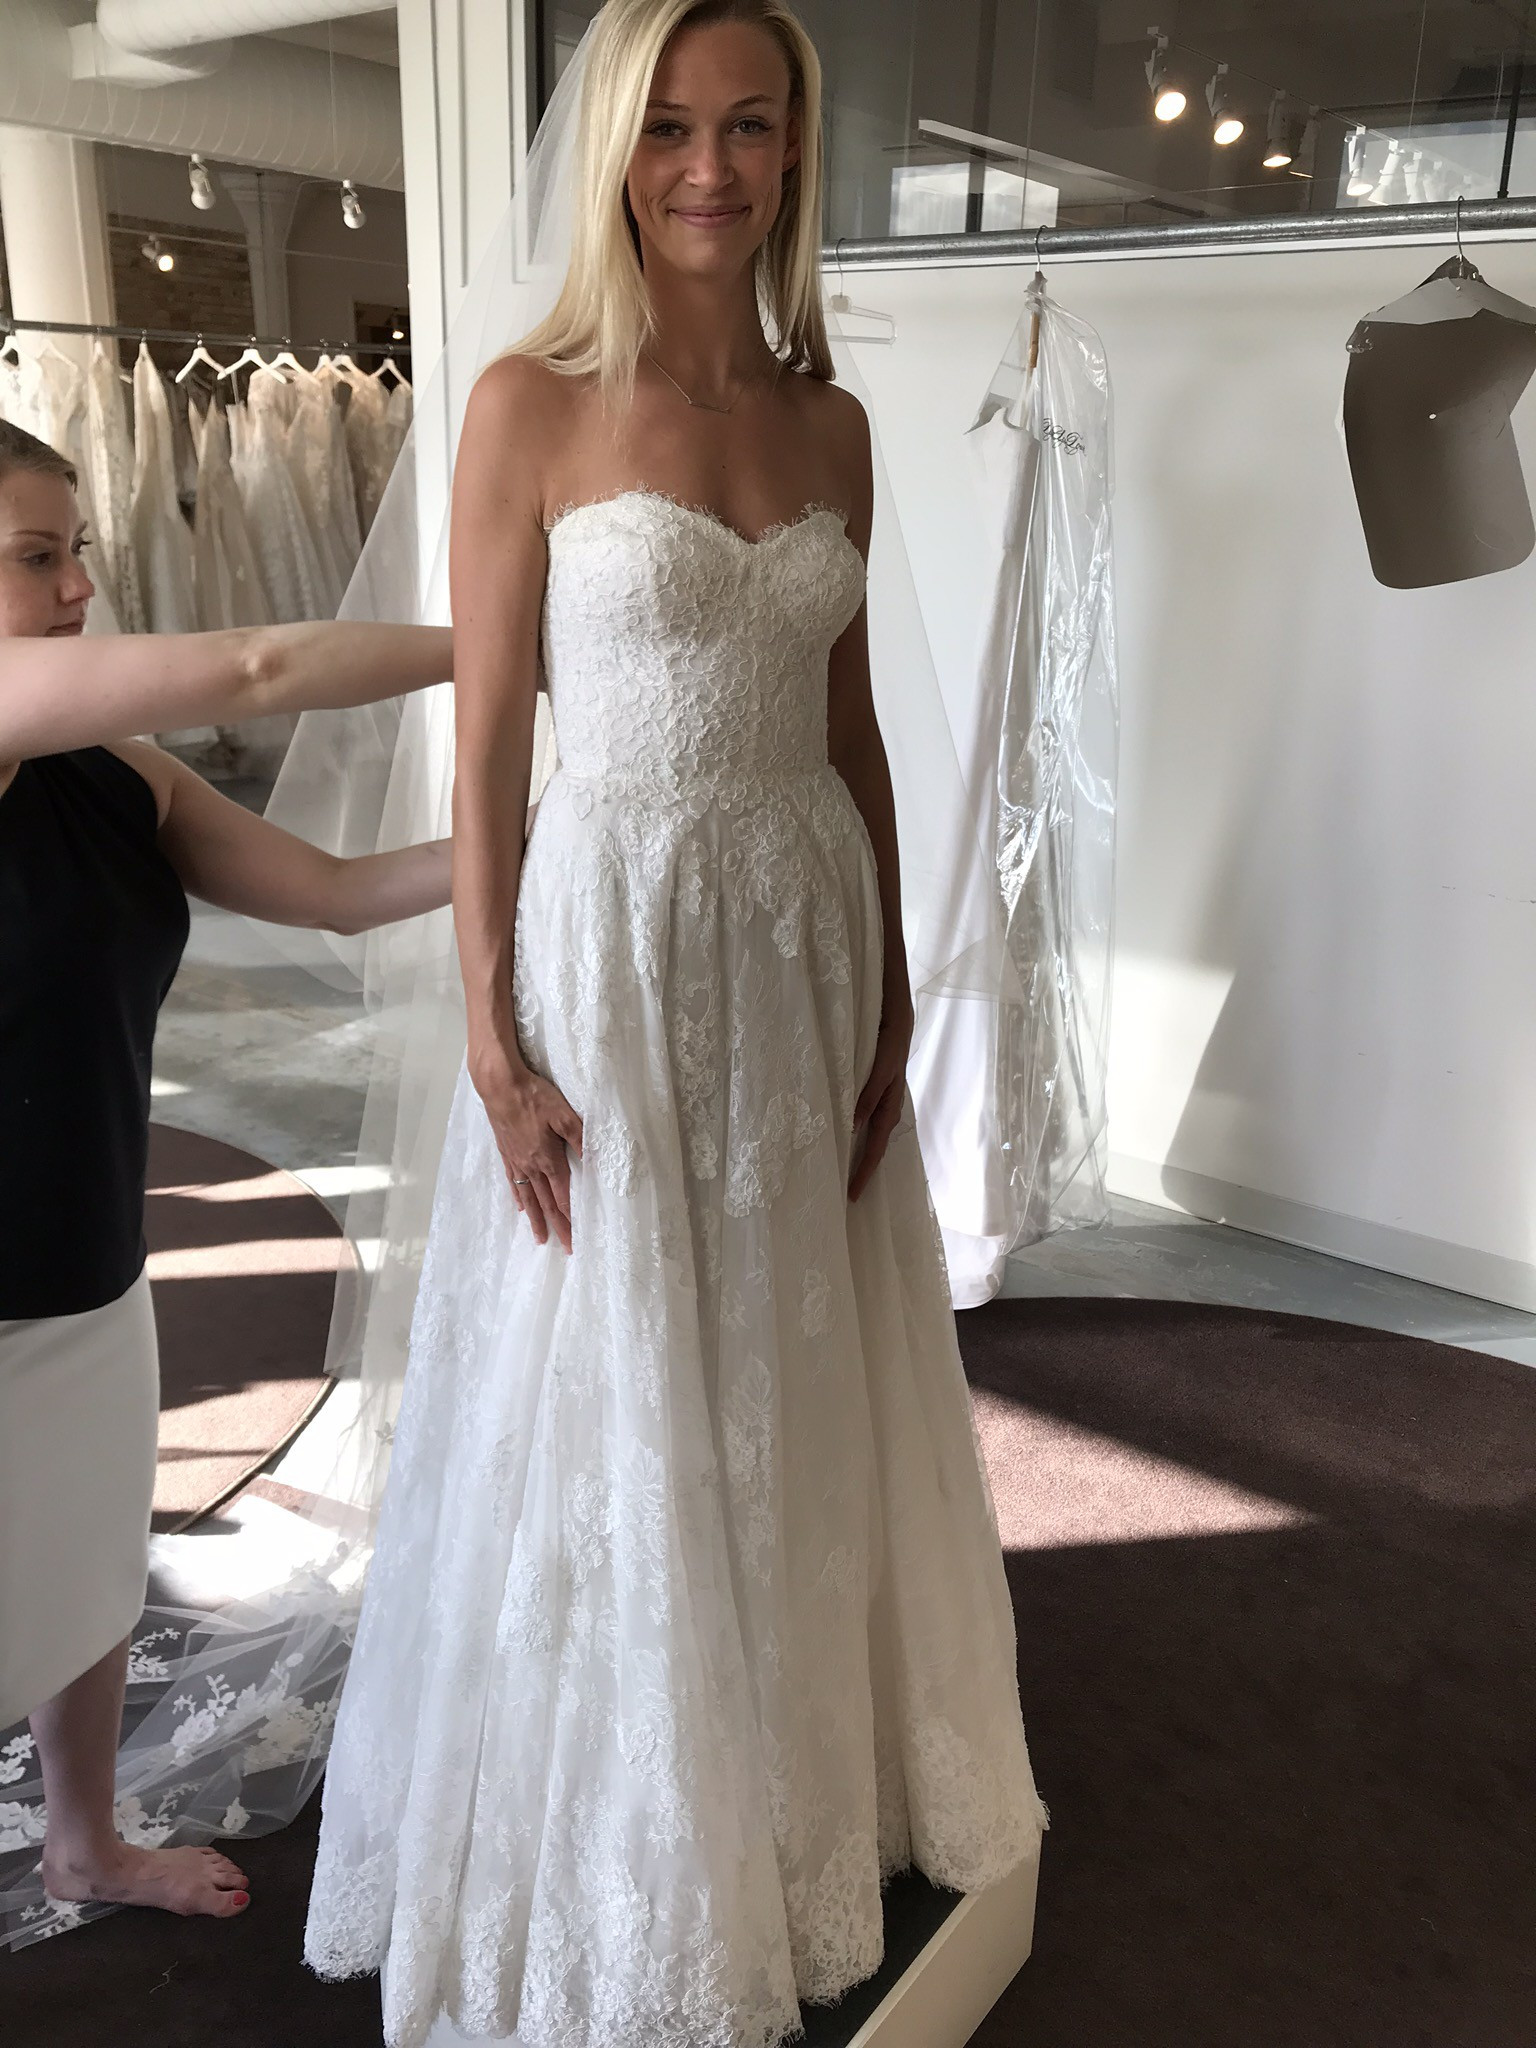 How Much Are Monique Lhuillier Wedding Gowns
 Monique Lhuillier Kate Sample Wedding Dress on Sale 